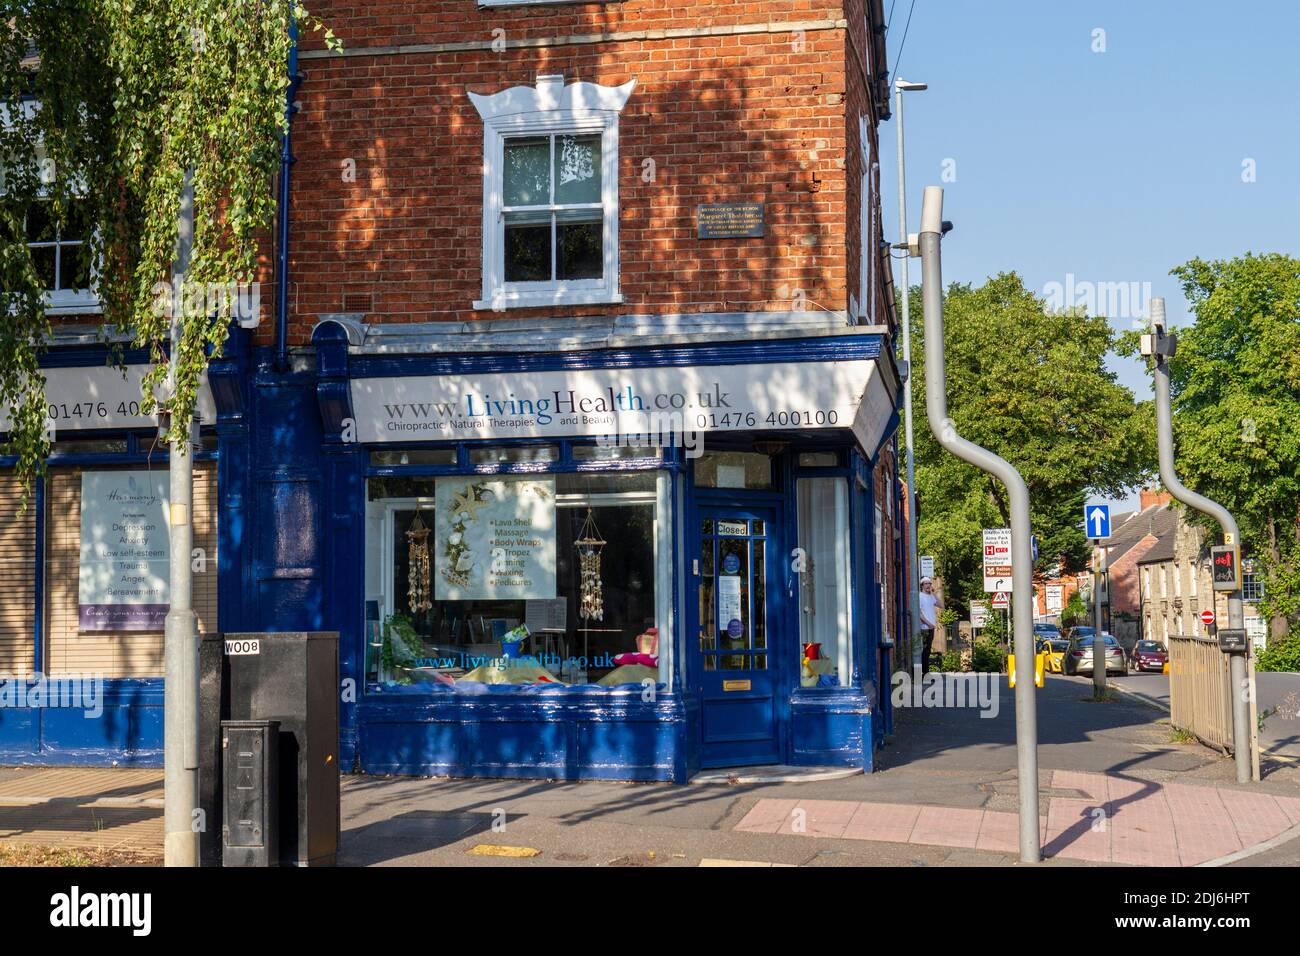 The birthplace of Margaret Thatcher, first female Prime Minister of the UK, (now Living Health Chiropractic Clinic), Grantham, Lincolnshire, UK. Stock Photo